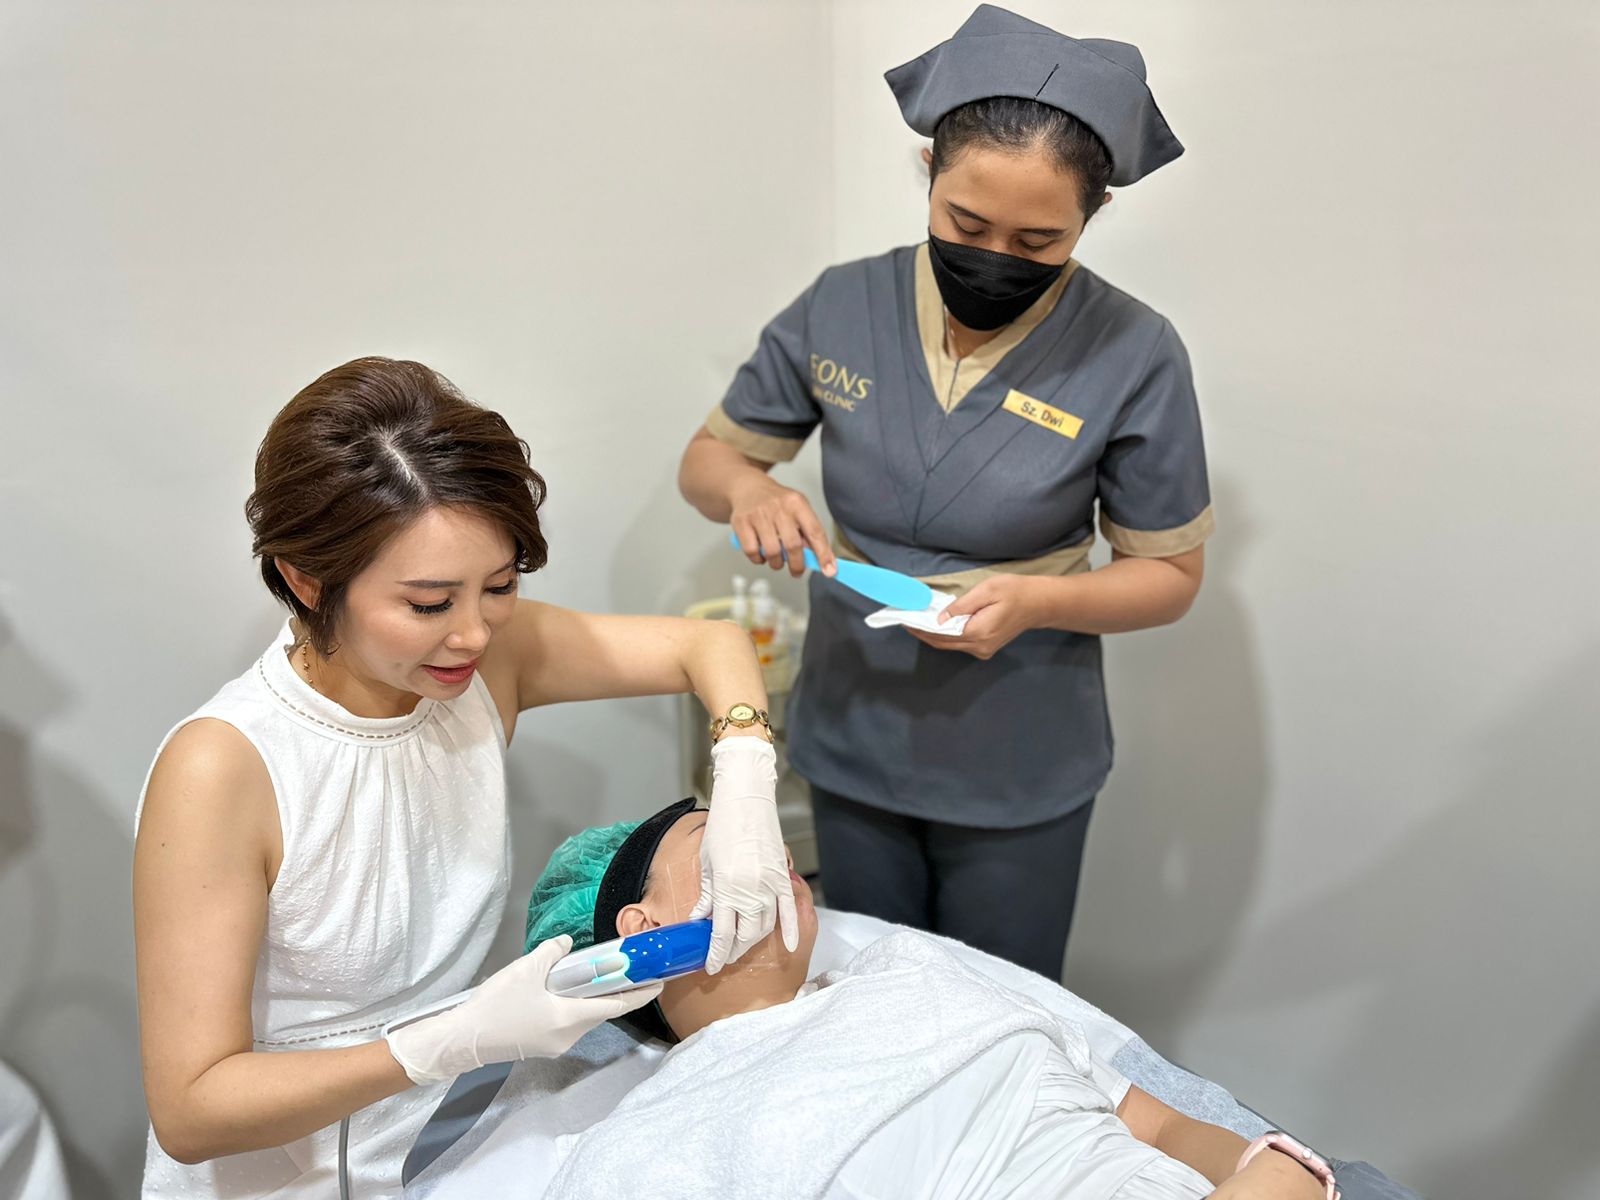 EONS Skin Clinic Expands to Galaxy Mall and Unveils Innovative 3D Barbie Face Treatment